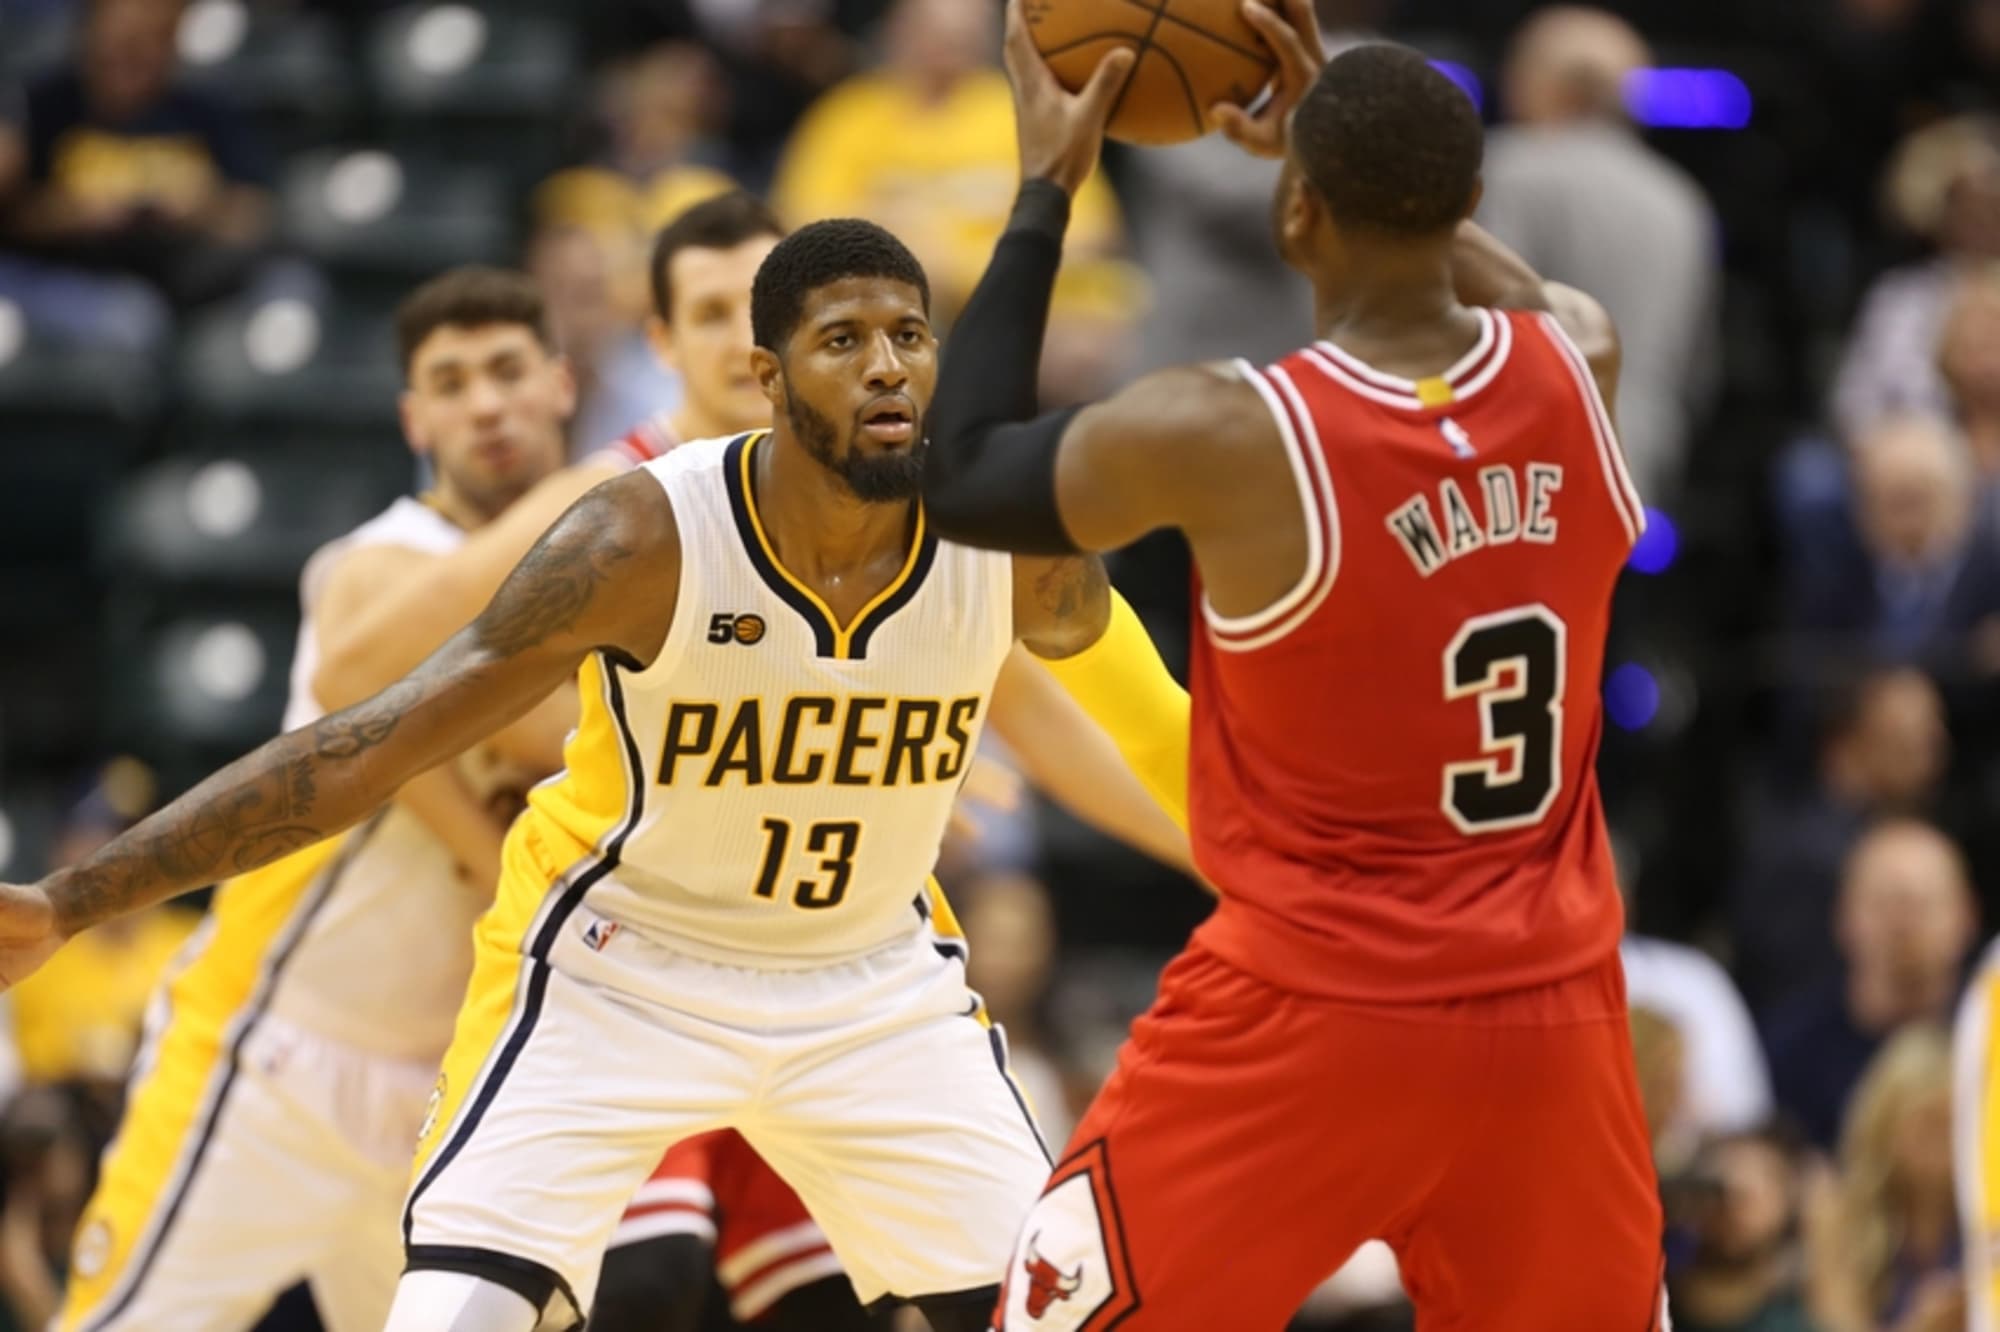 Indiana Pacers at Chicago Bulls Live Stream and Game Info